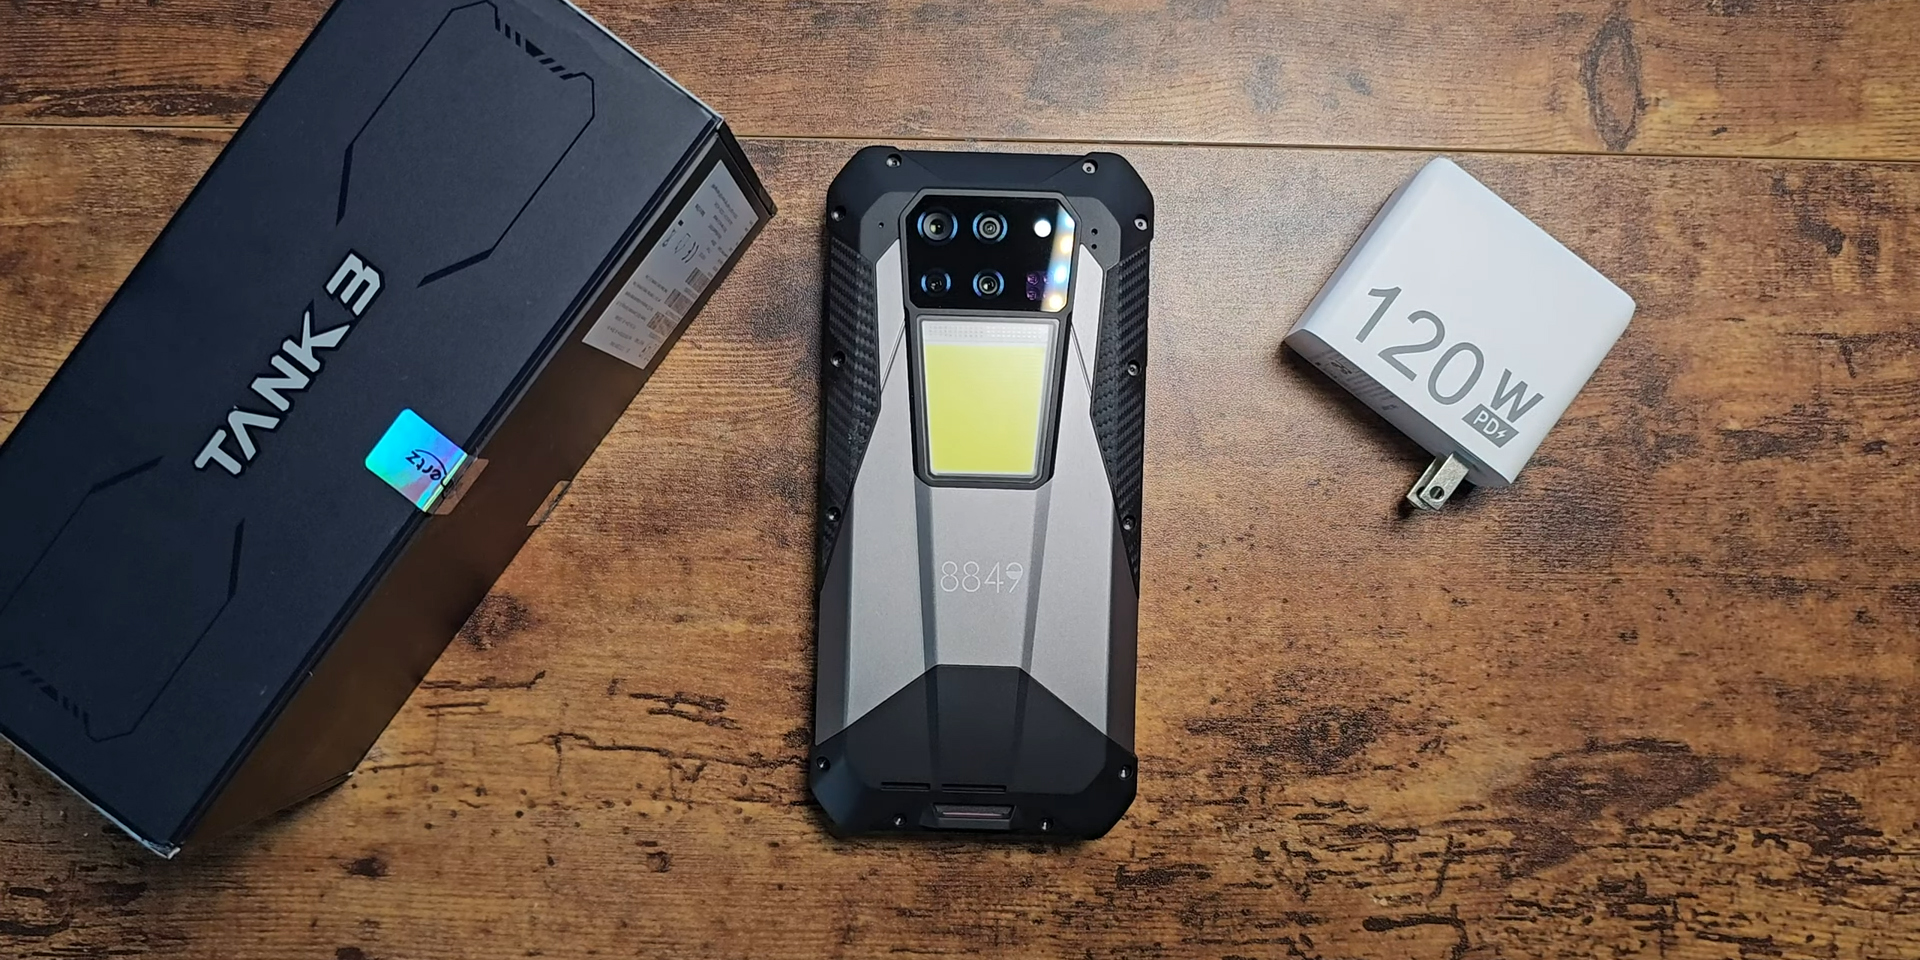 Smartphone with tank-like endurance: Over 2 months battery life